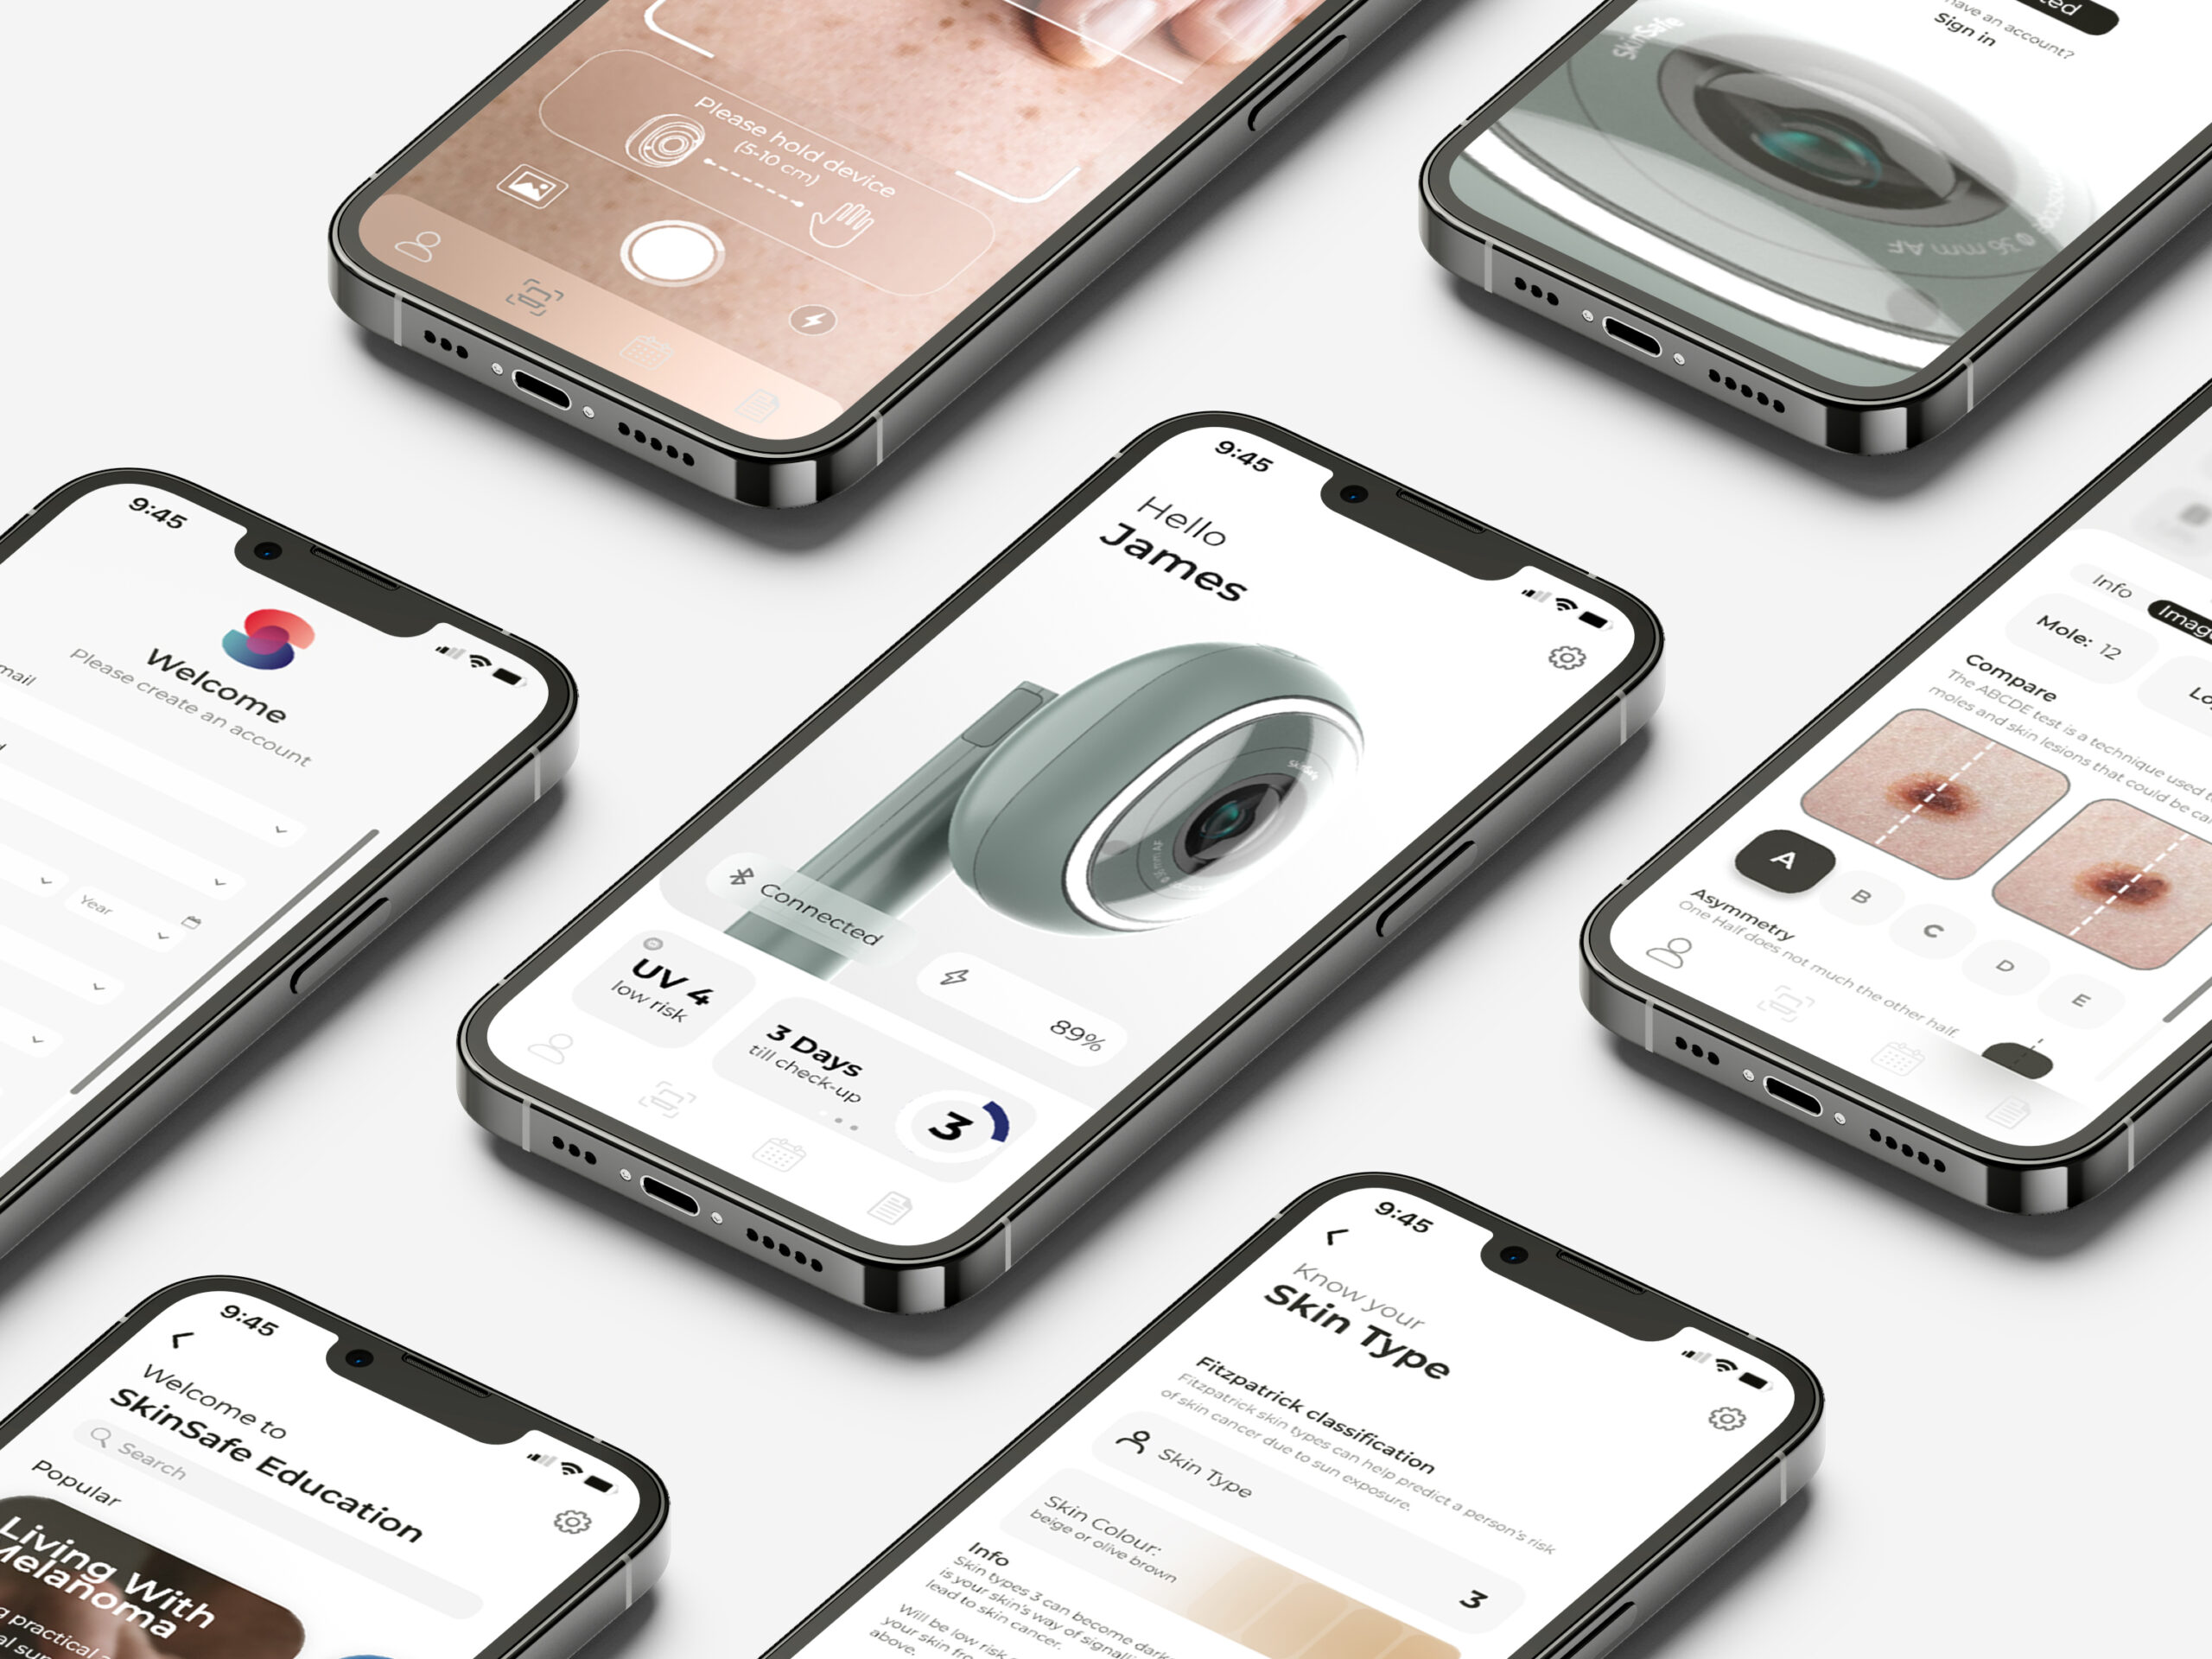 Render of the SkinSafe medical device app with visuals designed by the industrial team at Simple Design Works